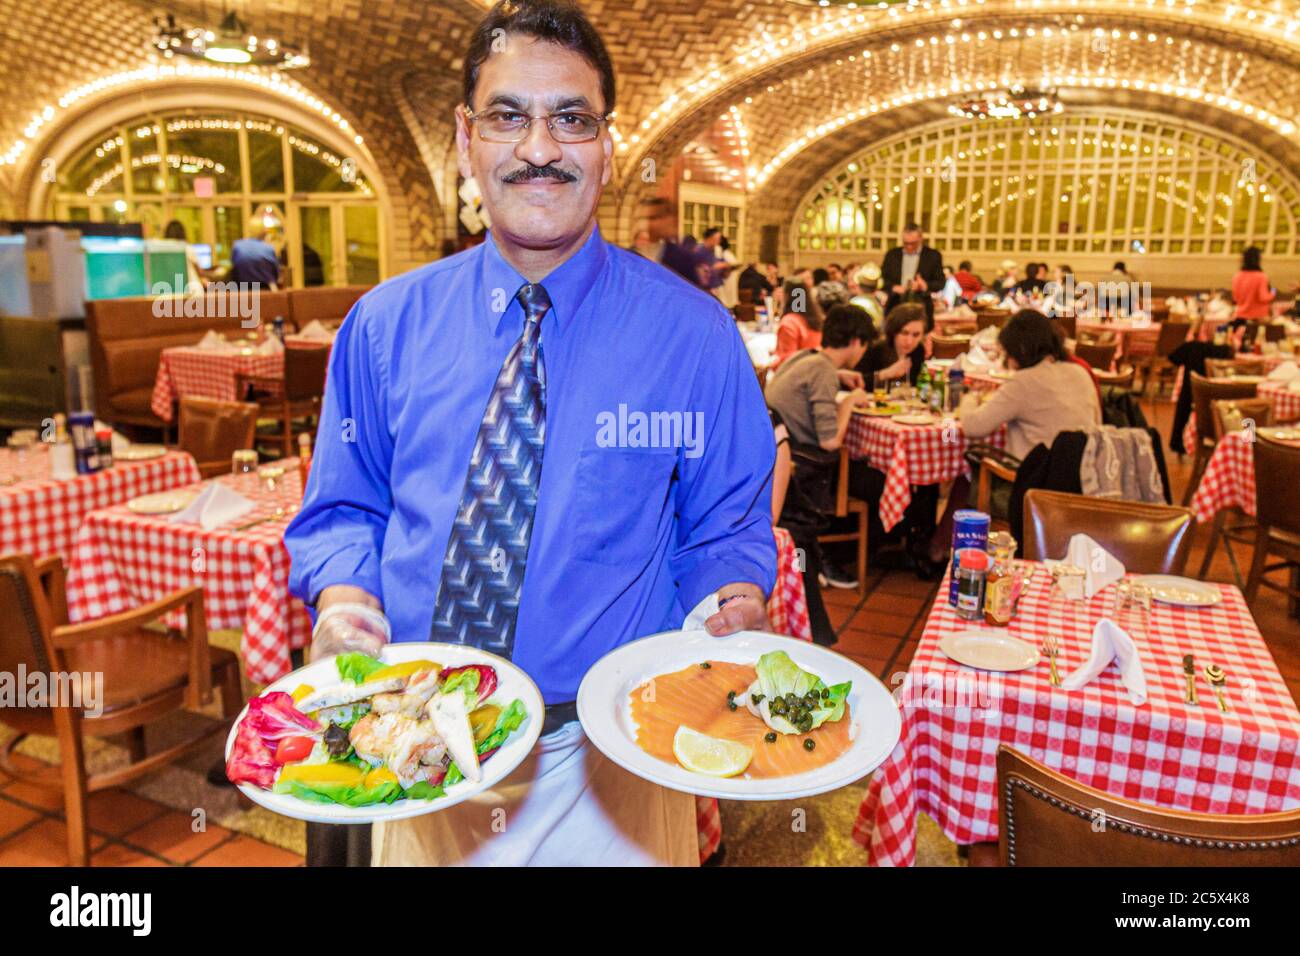 New York City,NYC NY Manhattan,Midtown,nd Street,Grand Central Station,train terminal,Grand Central Oyster Bar,seafood,restaurant restaurants food din Stock Photo